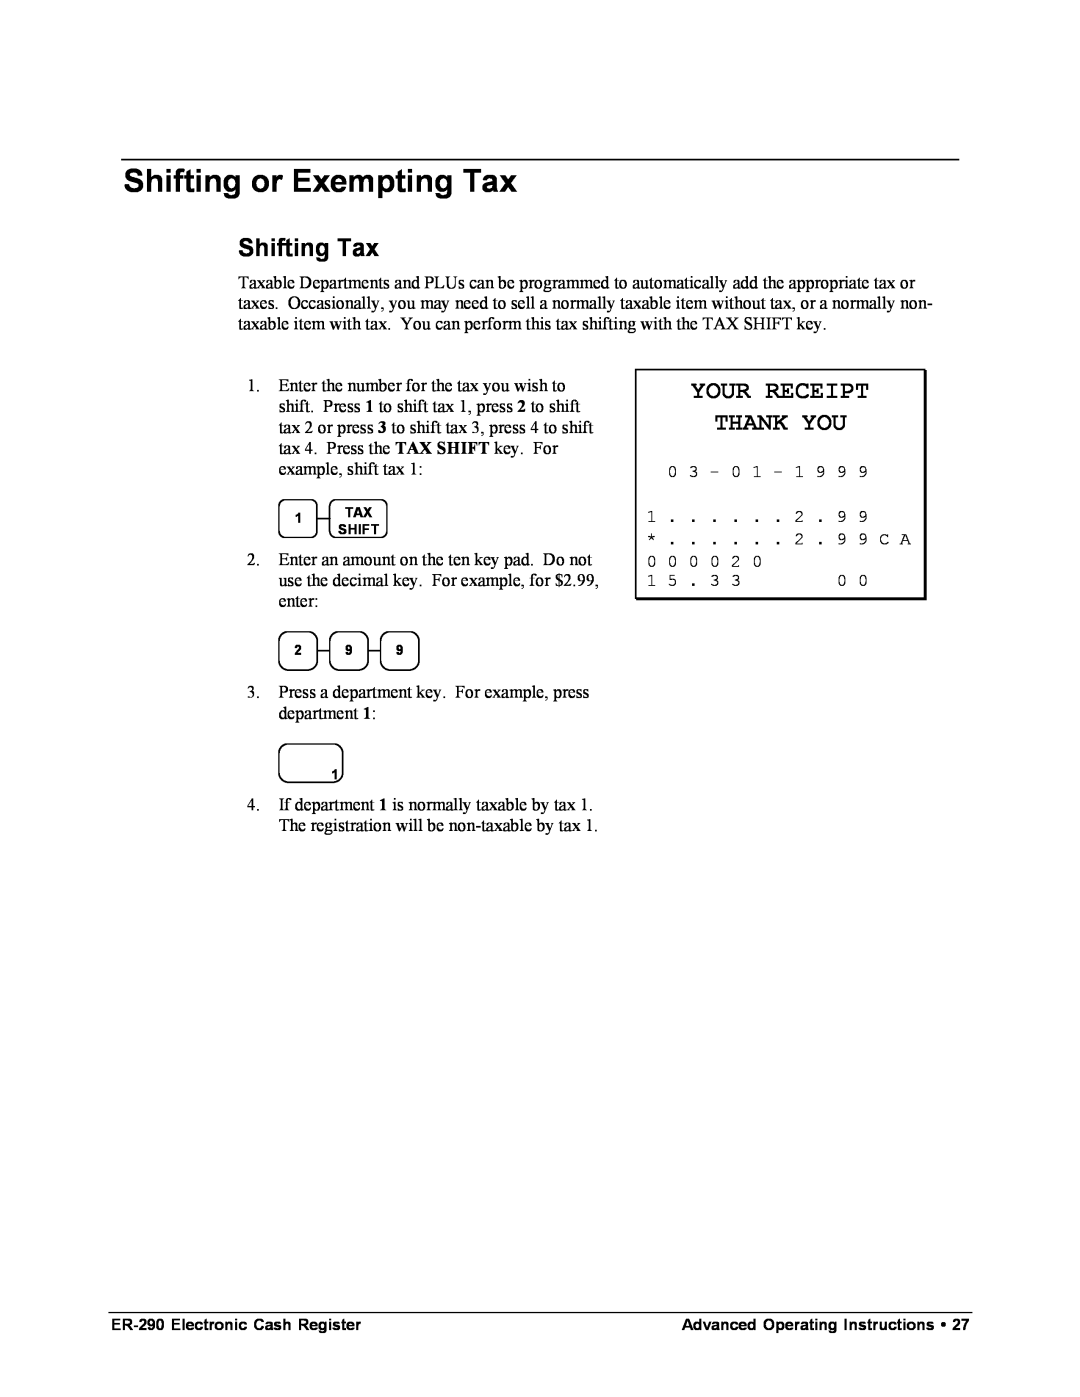 Samsung M-ER290 specifications Shifting or Exempting Tax, Shifting Tax, Your Receipt Thank You 